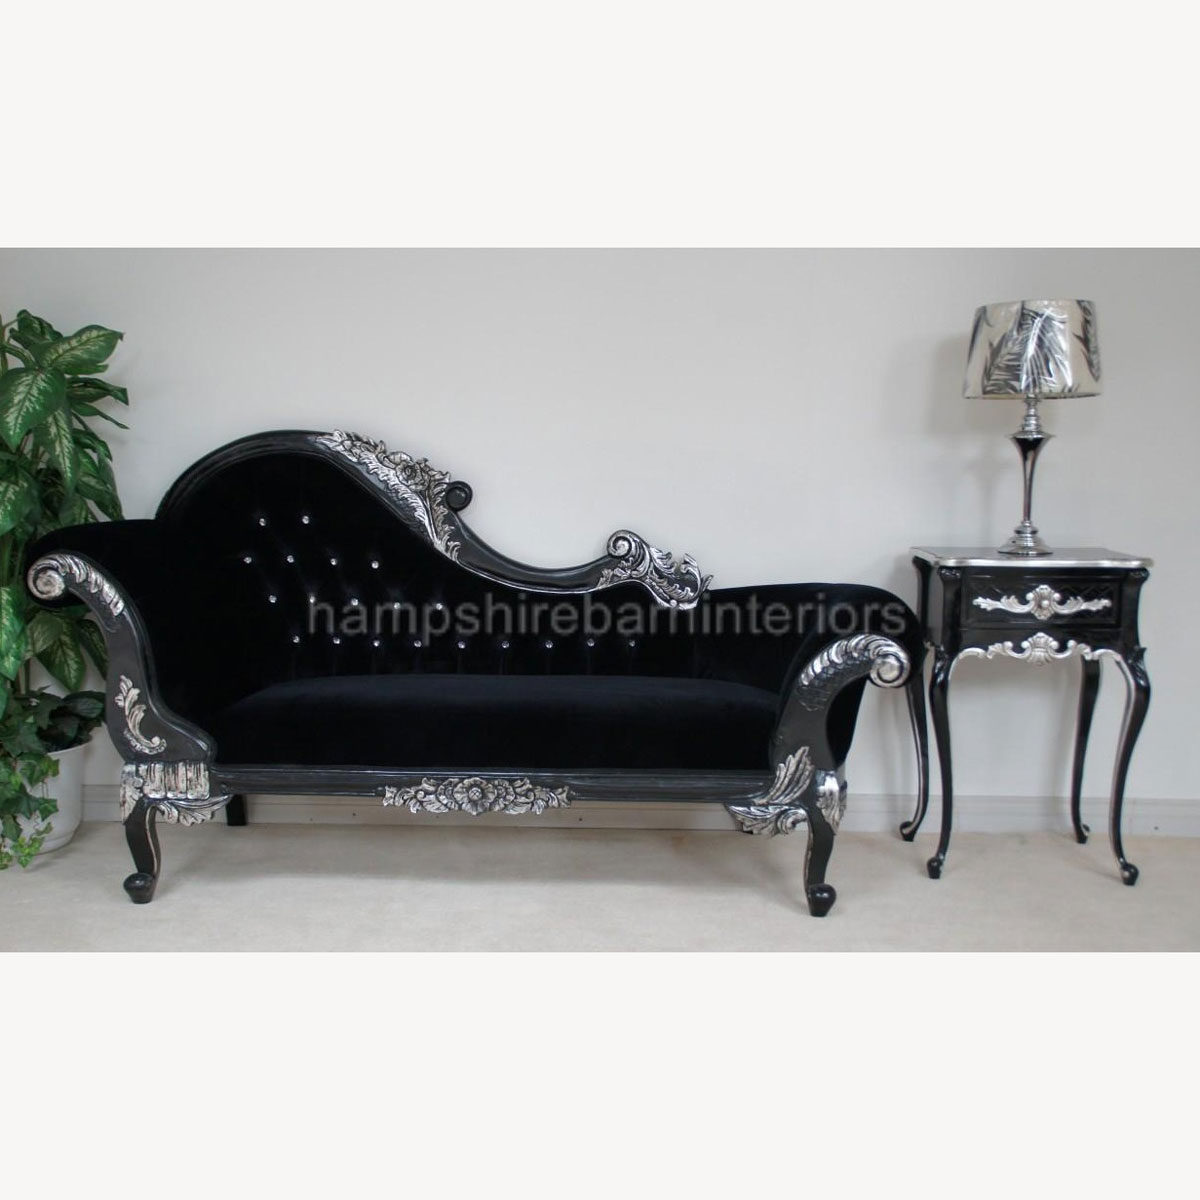 Black Diamond Silvered Red Hampshire Medium Chaise …with Crystal Buttons And Black Velvet - Hampshire Barn Interiors - Black Diamond Silvered Red Hampshire Medium Chaise …with Crystal Buttons And Black Velvet -